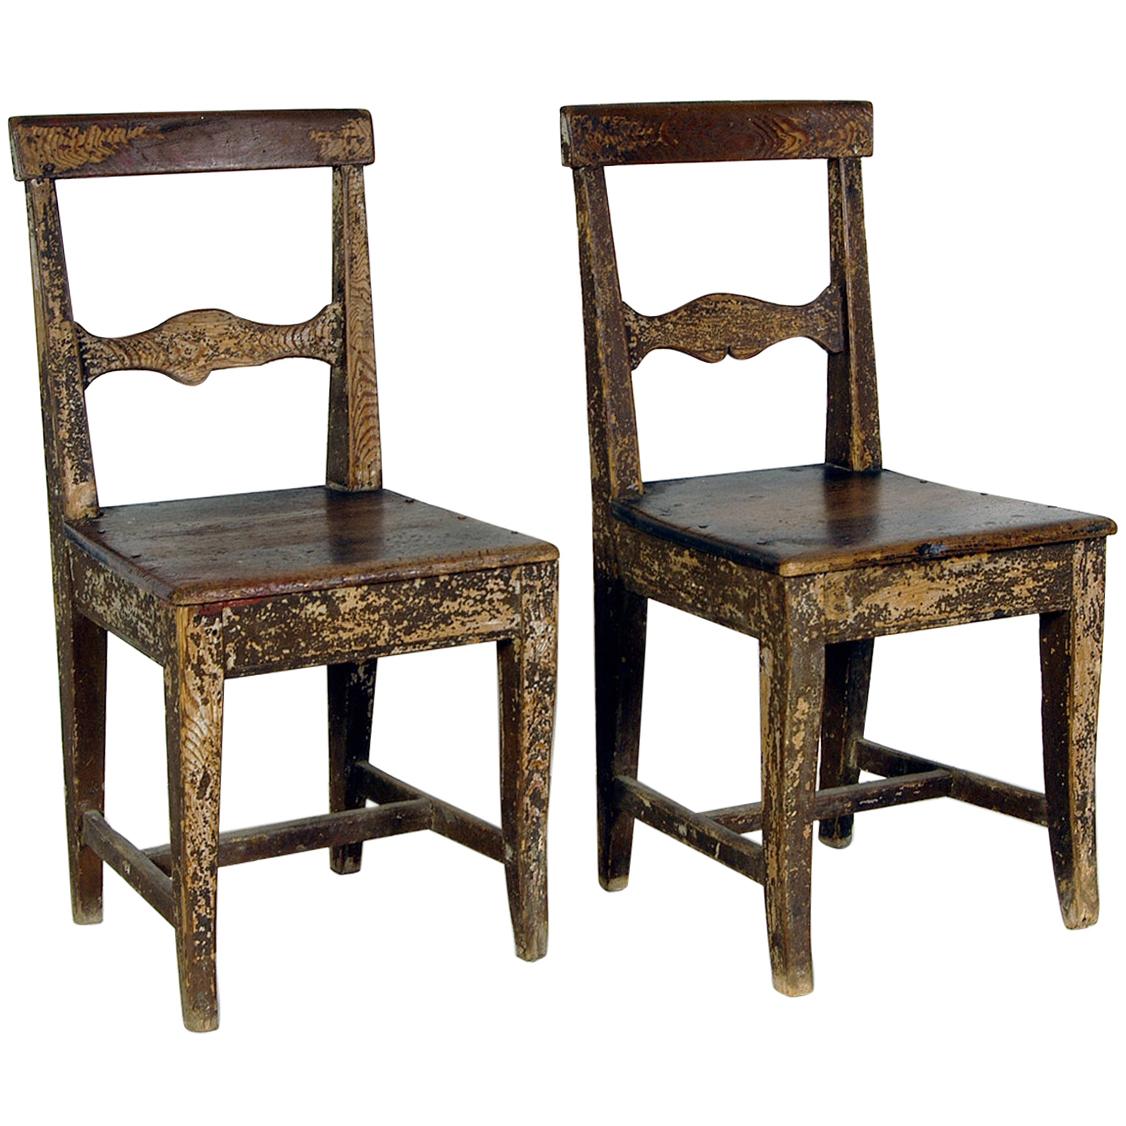 Pair of 19th Century Pitch Pine Swedish Vernacular Chairs in Original Paint